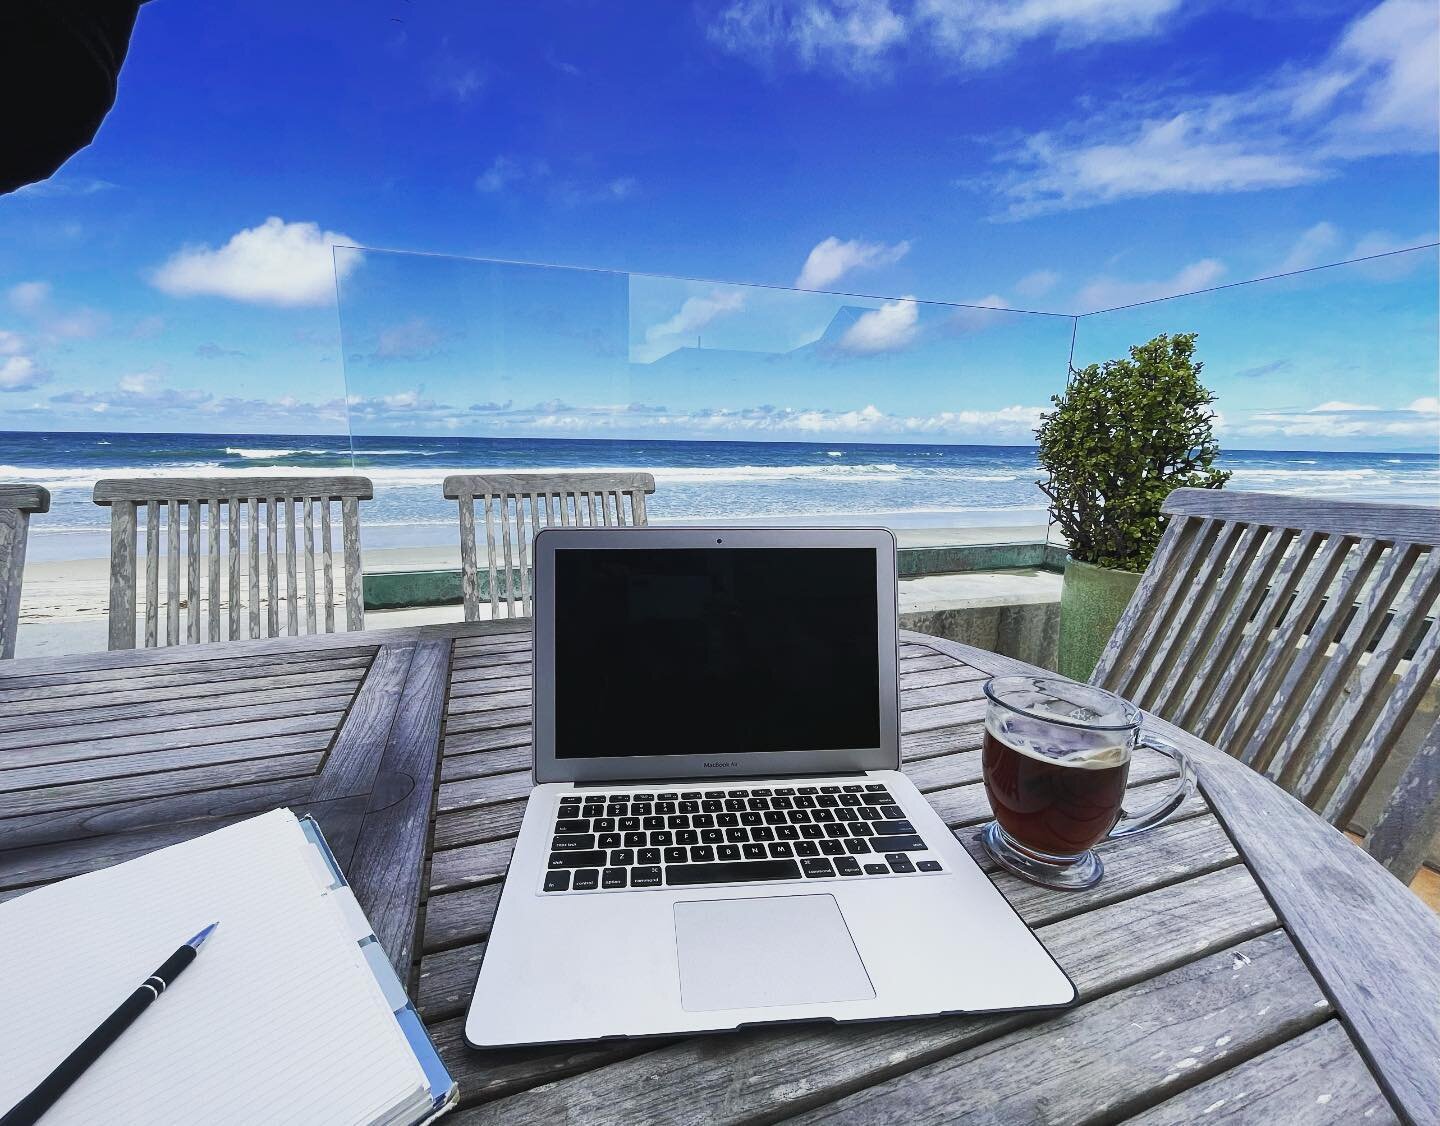 Whose ready for their summer &ldquo;Workcation&rdquo; ? 🤩 🏖️ 🌊 🌞 
.
.
.
.
#trdavisinc #trdavisvacation #workcation #workation #views #oceanfront #oceanfrontrentals #oceanfrontviews #summer #summervacation #beach #beachrentals #airbnb #vrbo #super